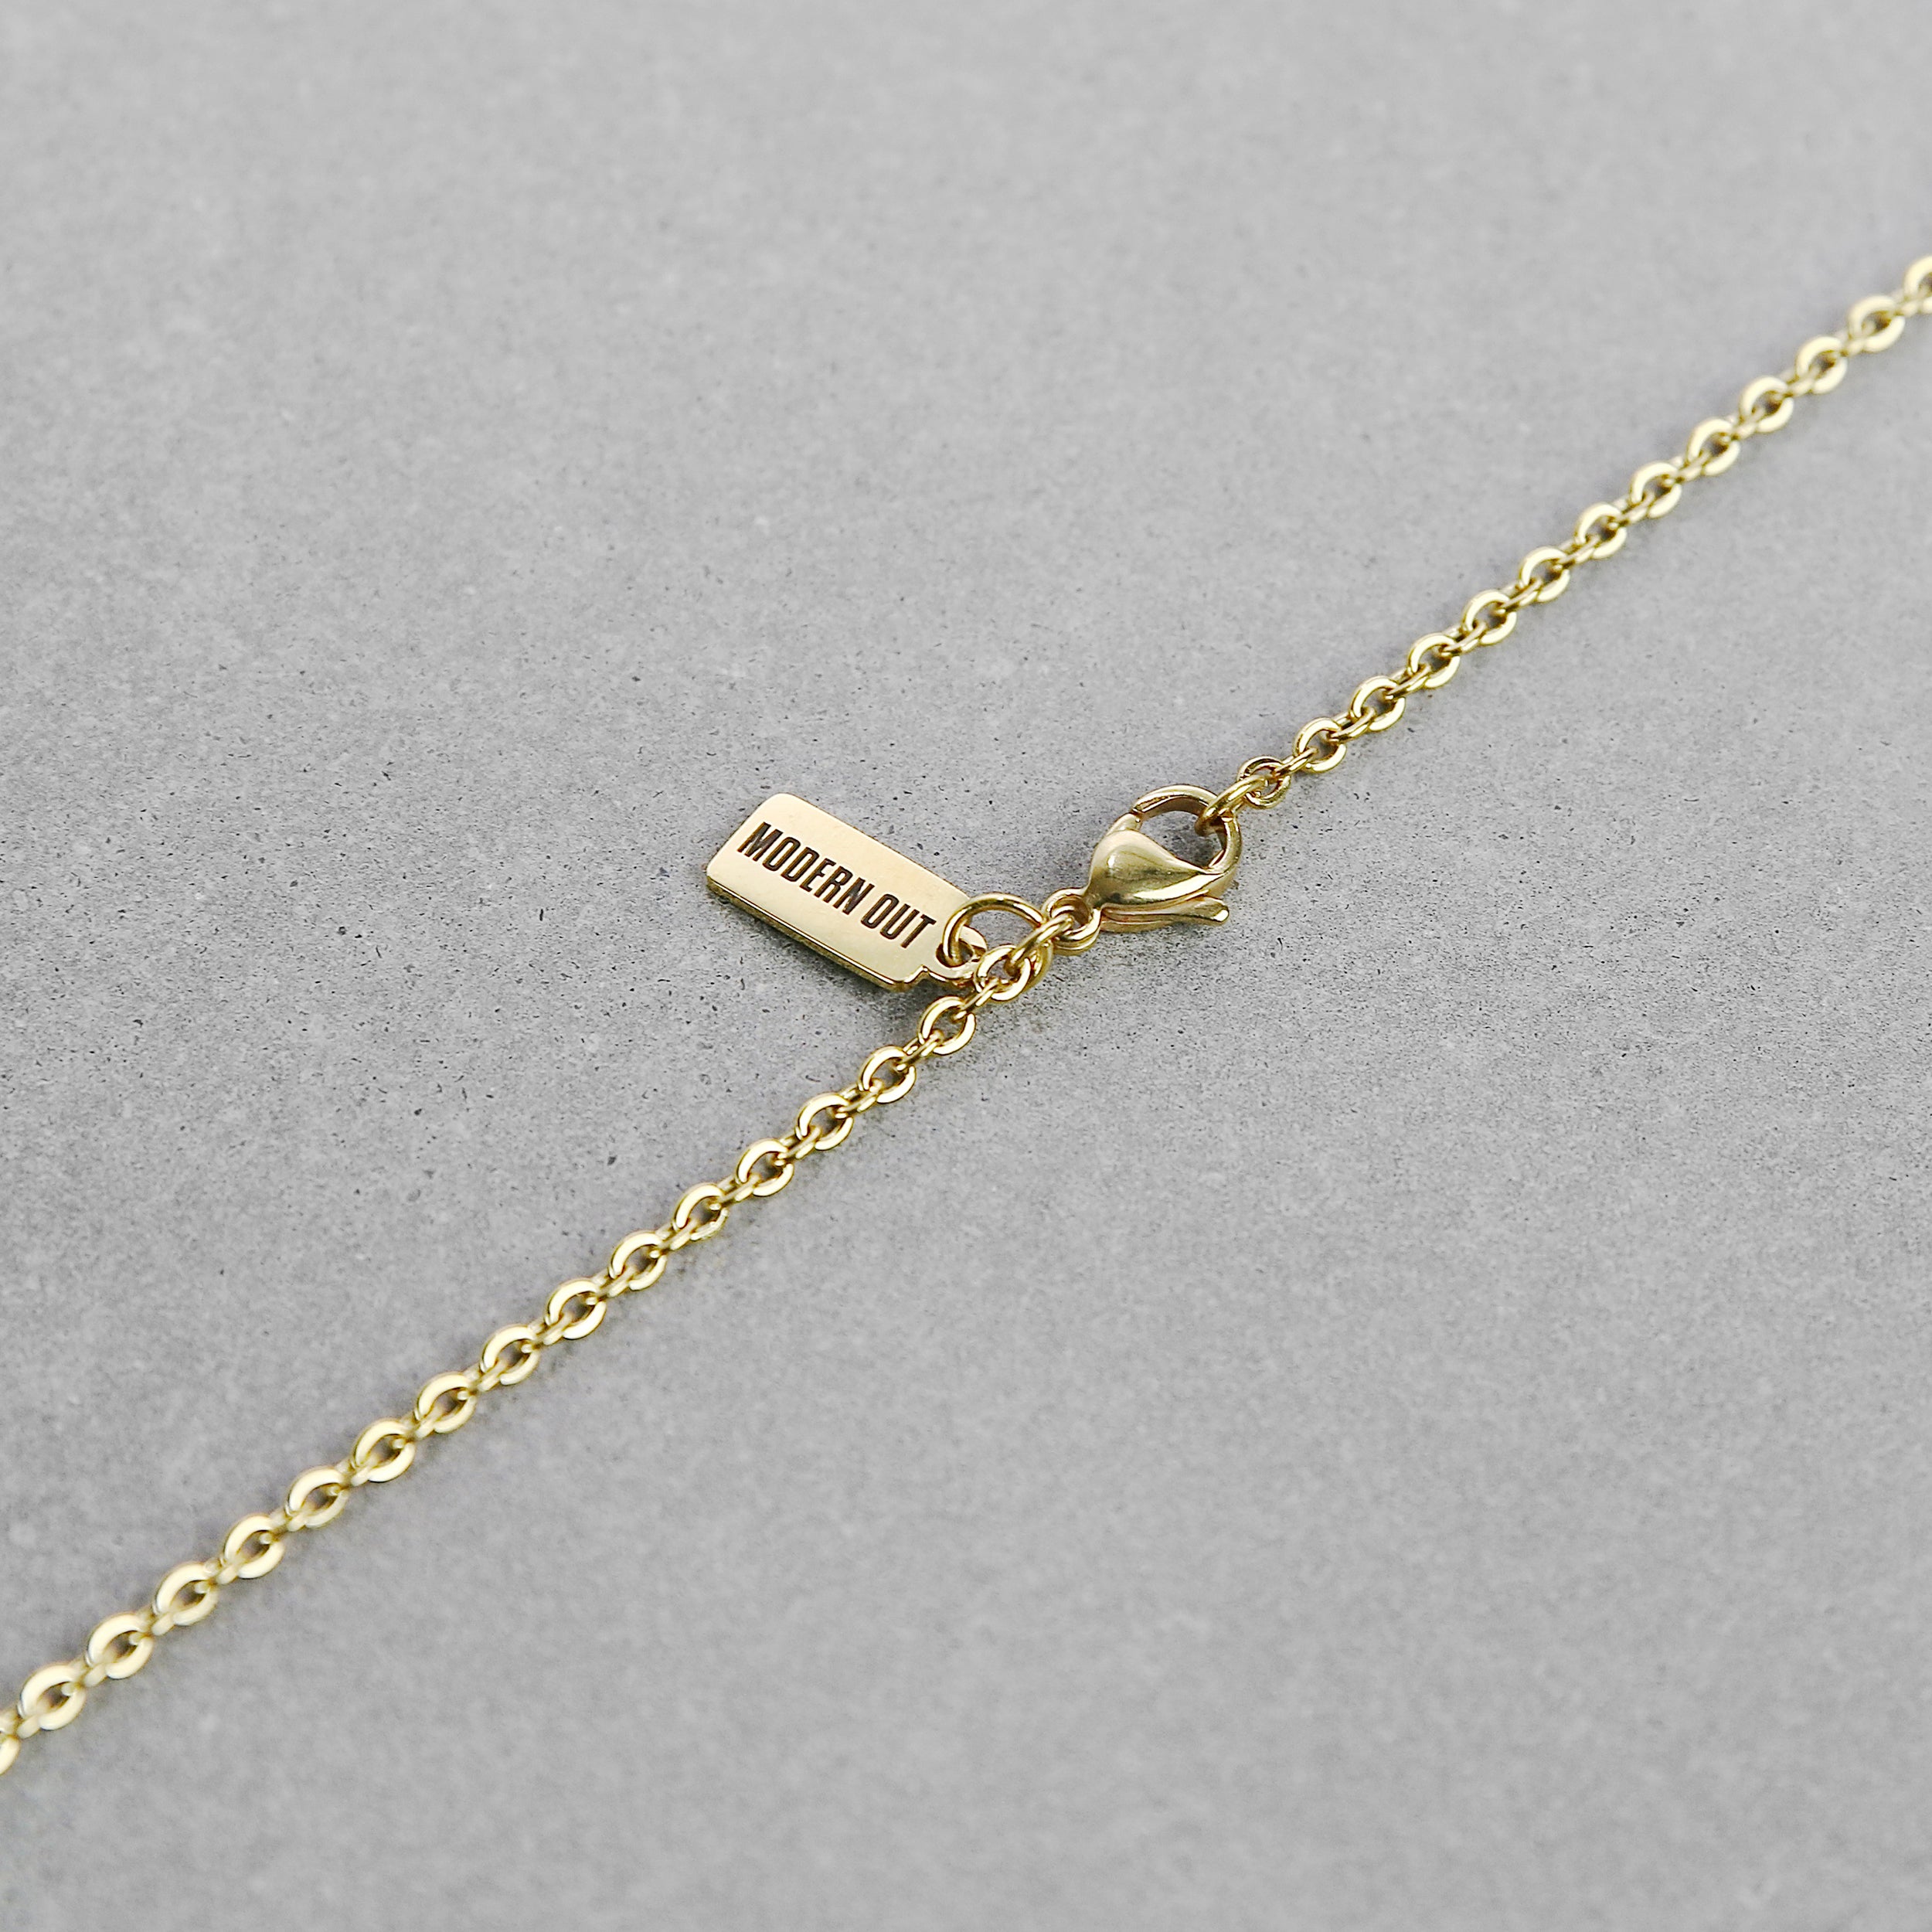 Good Luck Necklace - Gold